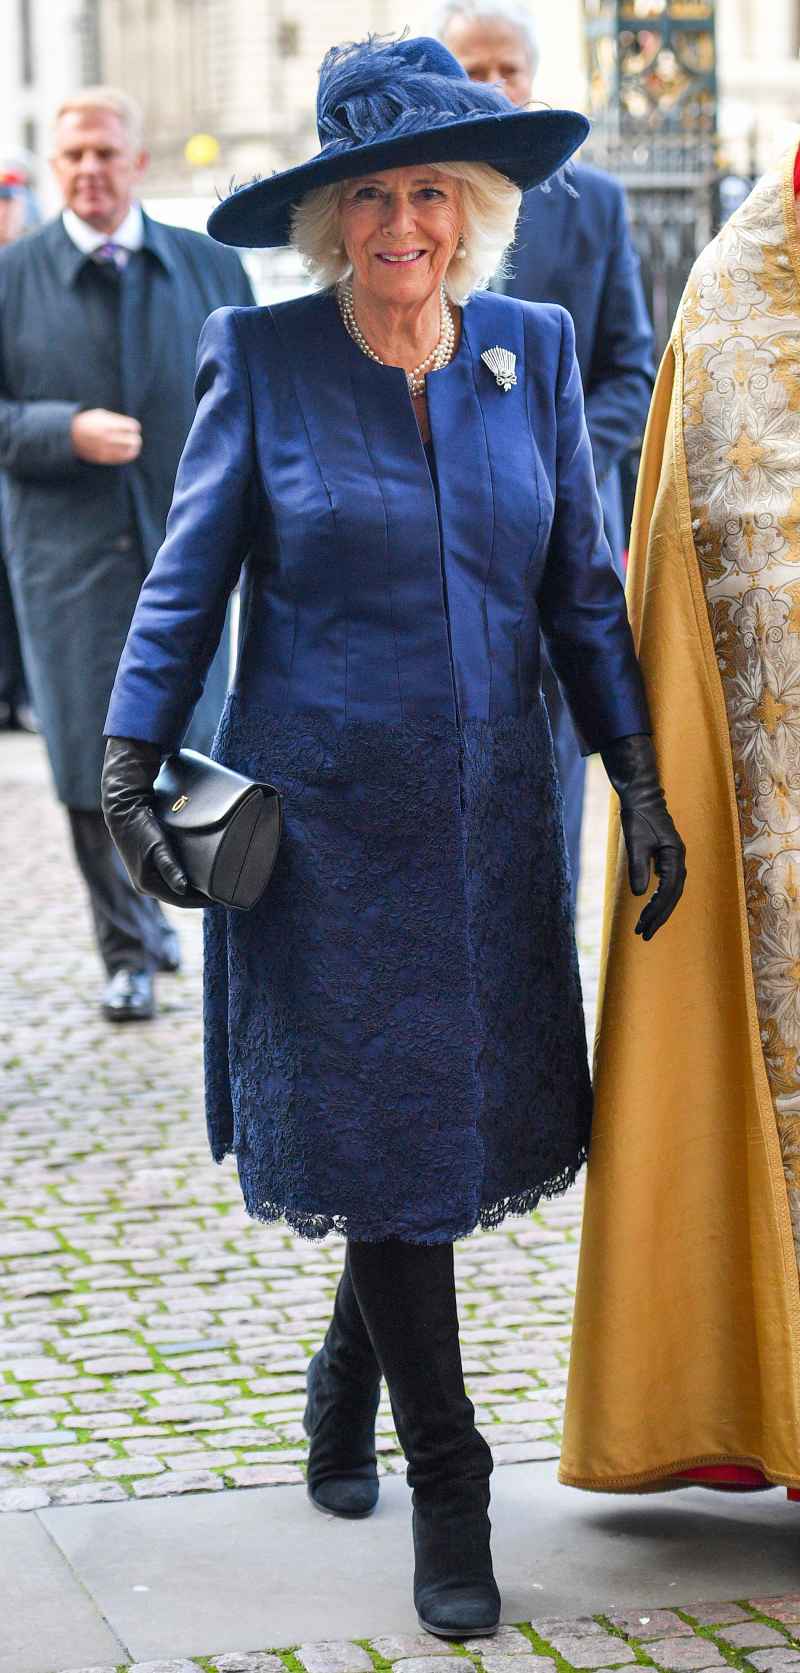 Camilla Duchess of Cornwall's Style - December 11, 2019